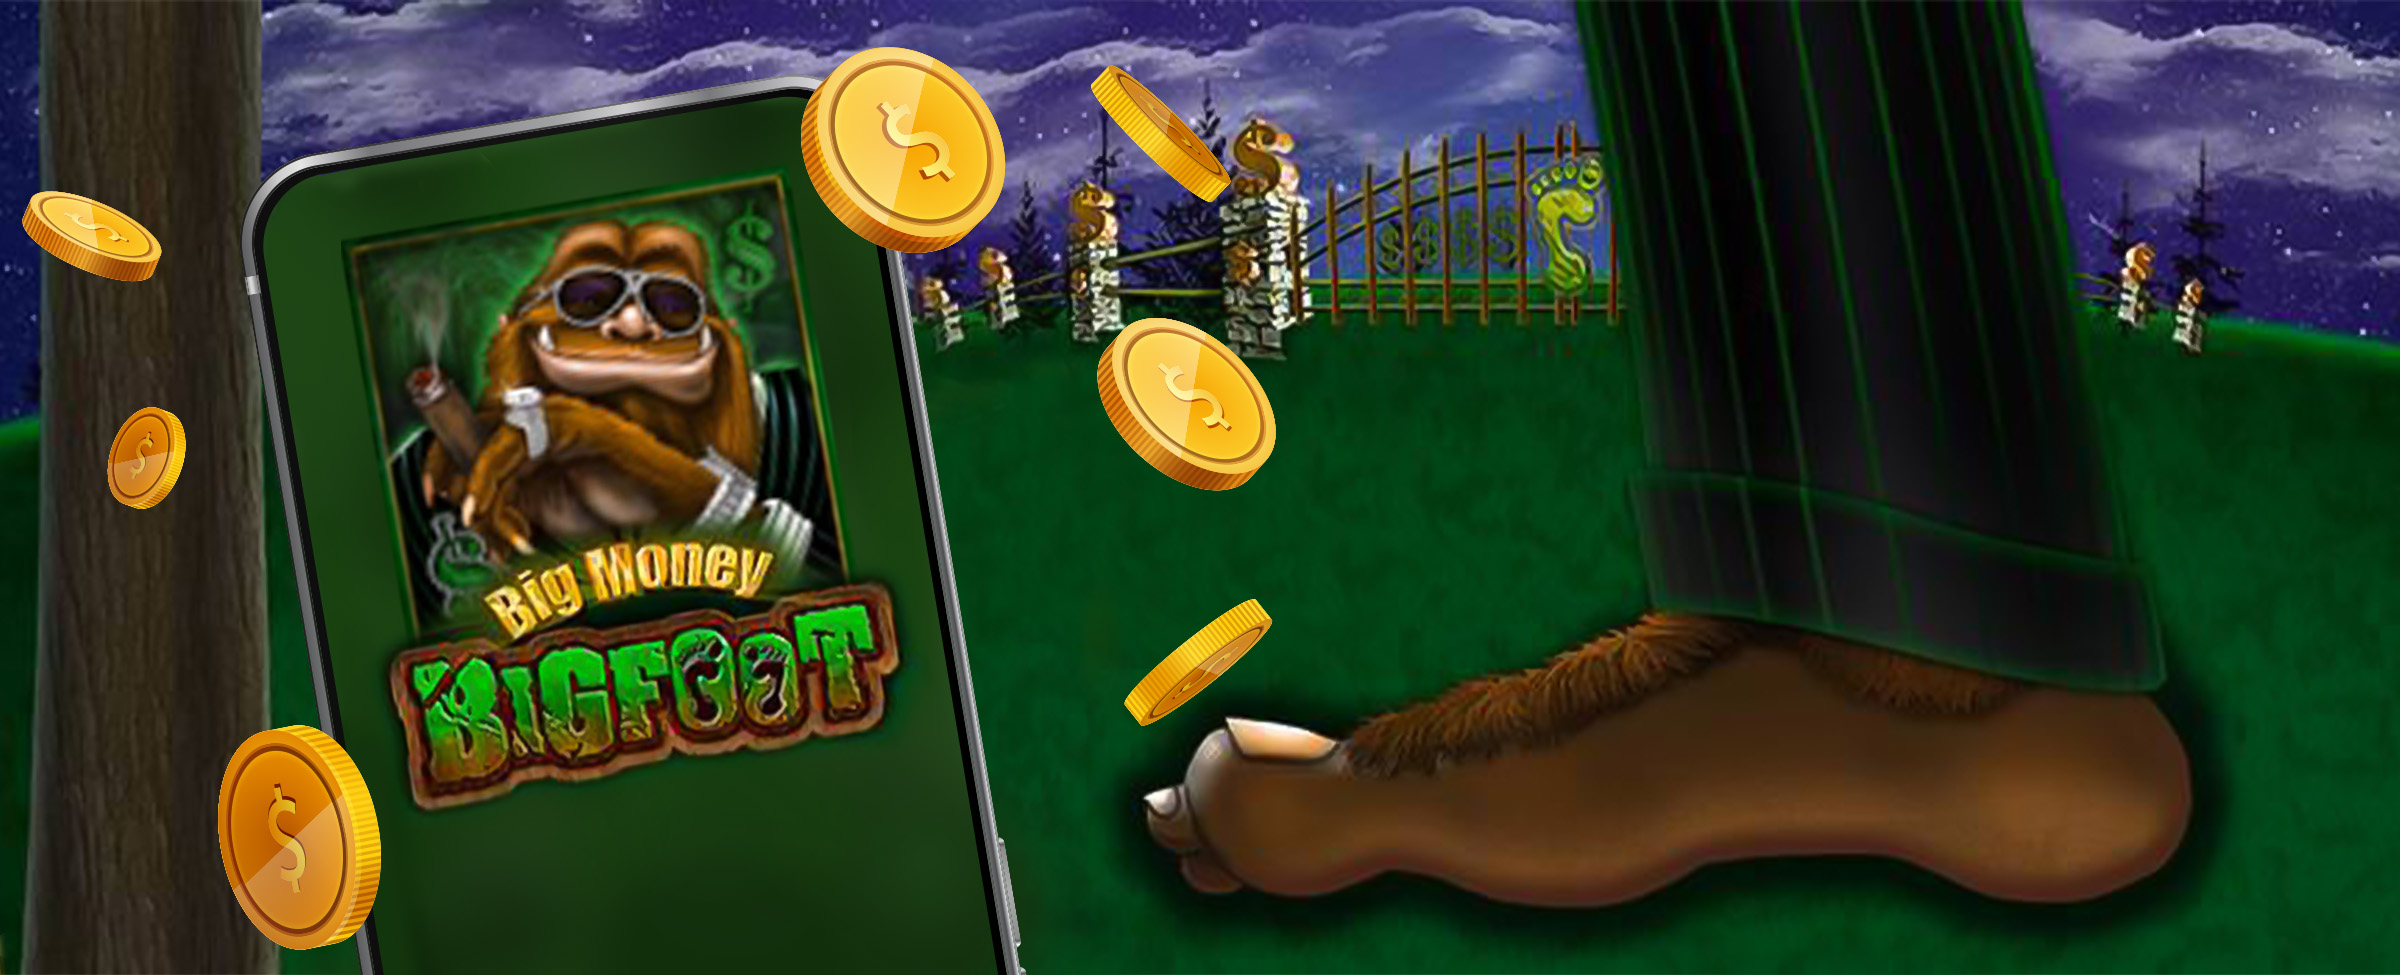 Scene of a grassed area at night with a bigfoot’s right foot standing off to the center, next to a mobile phone showing the Cafe Casino Big Money Bigfoot slot game with gold coins spouting outward